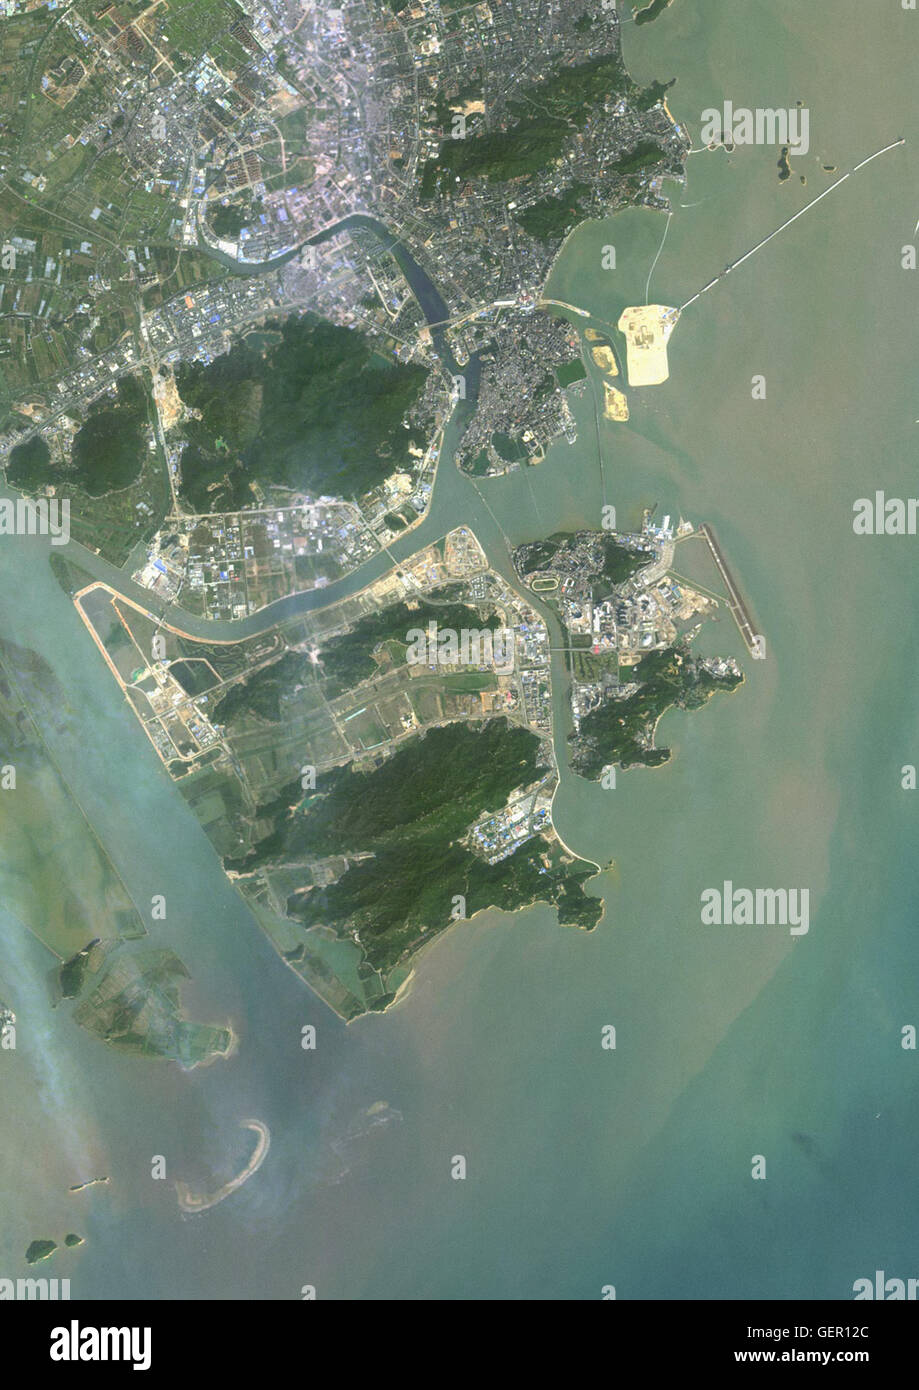 Satellite view of Macau. This image was compiled from data acquired by Landsat 8 satellite in 2015. Stock Photo